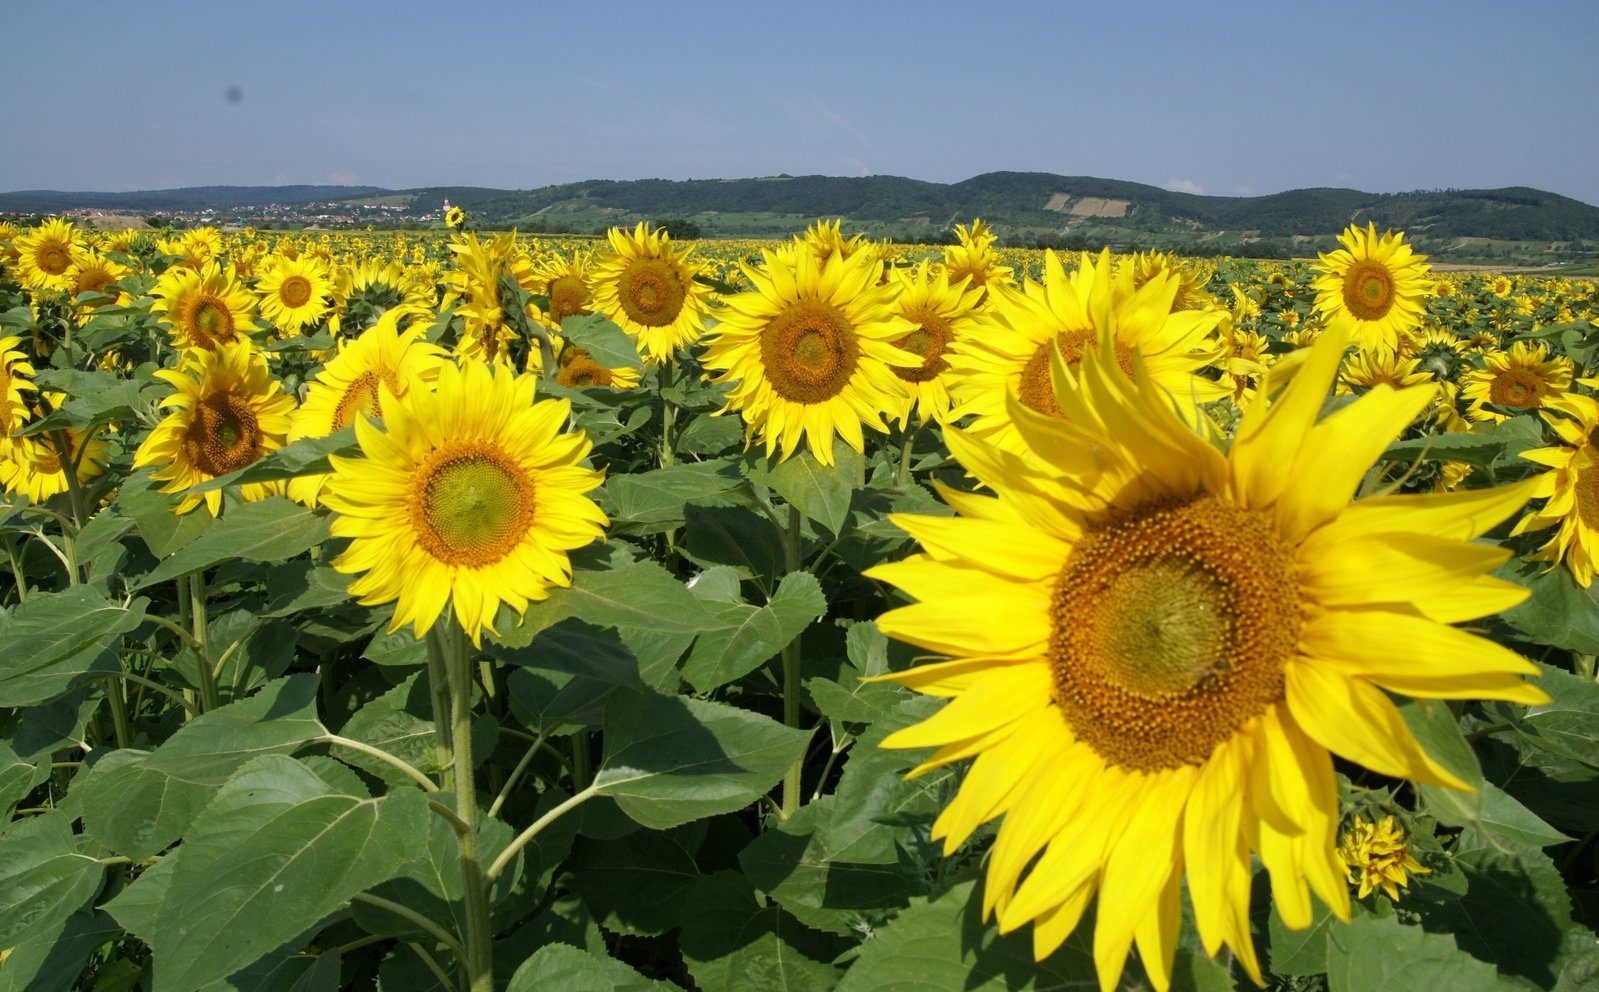 a field with many sunflowers and a hill in the background